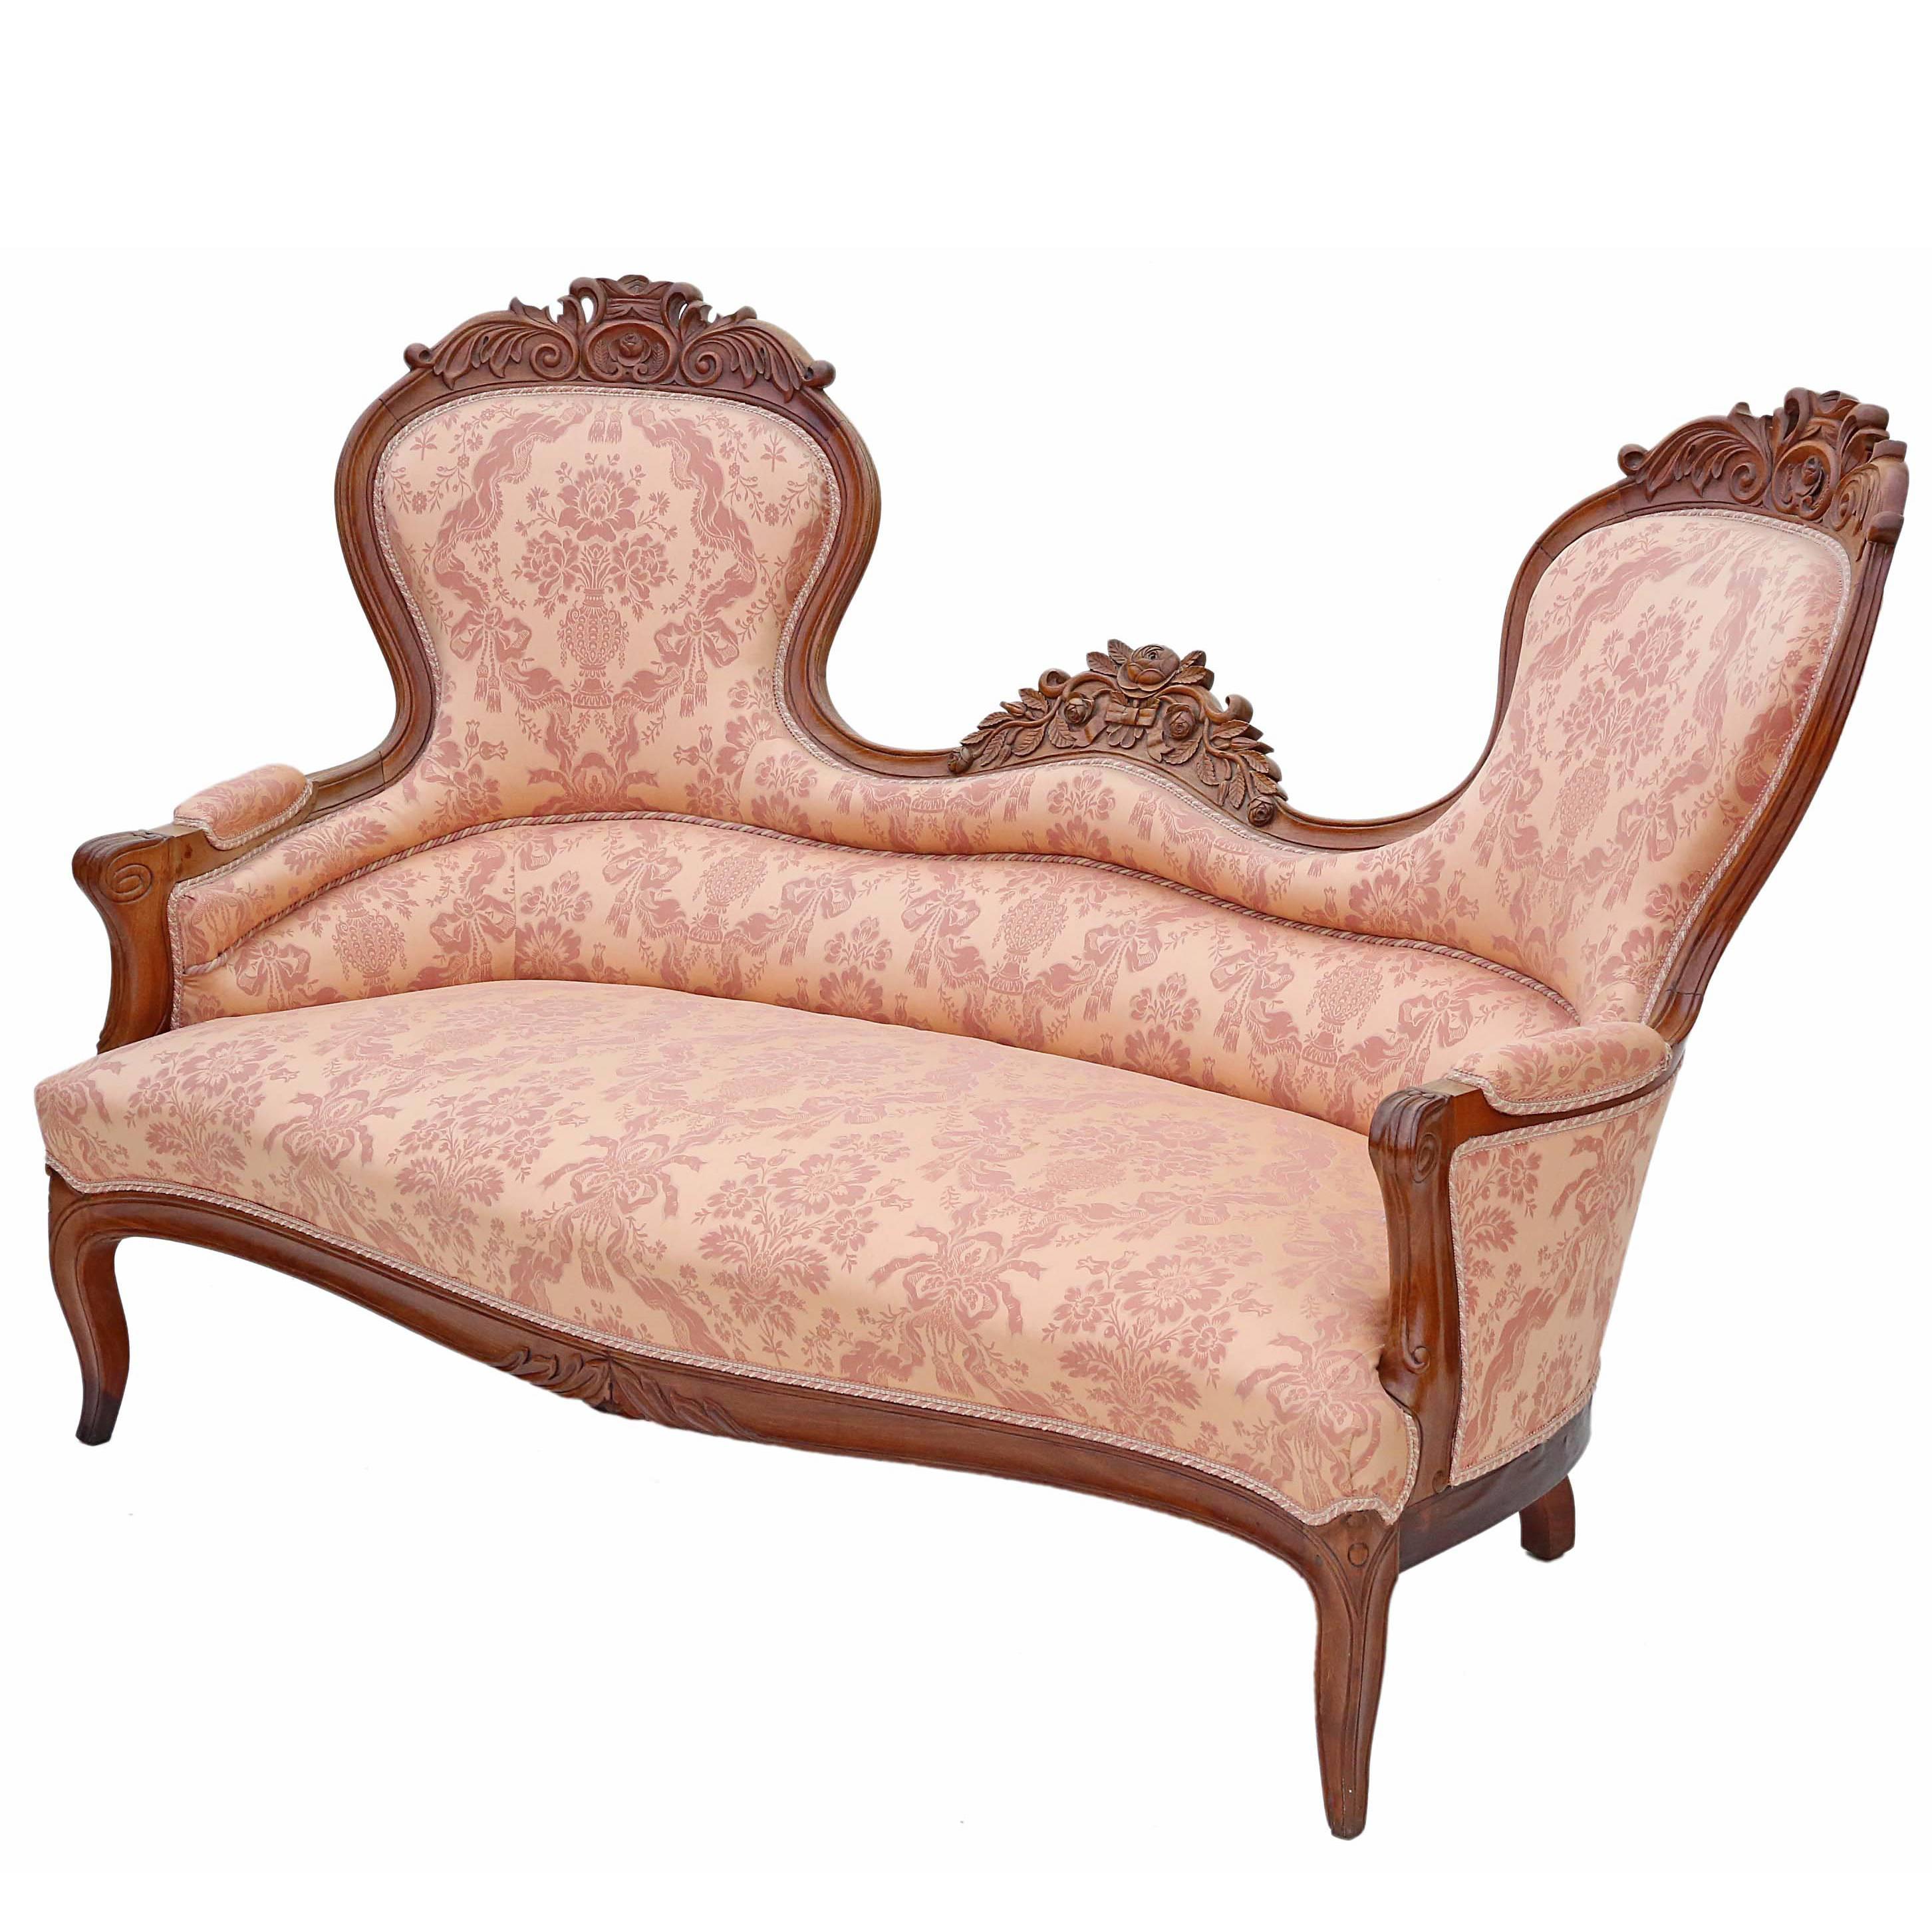 Antique Quality 19th Century Carved French Walnut Sofa Settee Chaise Longue For Sale